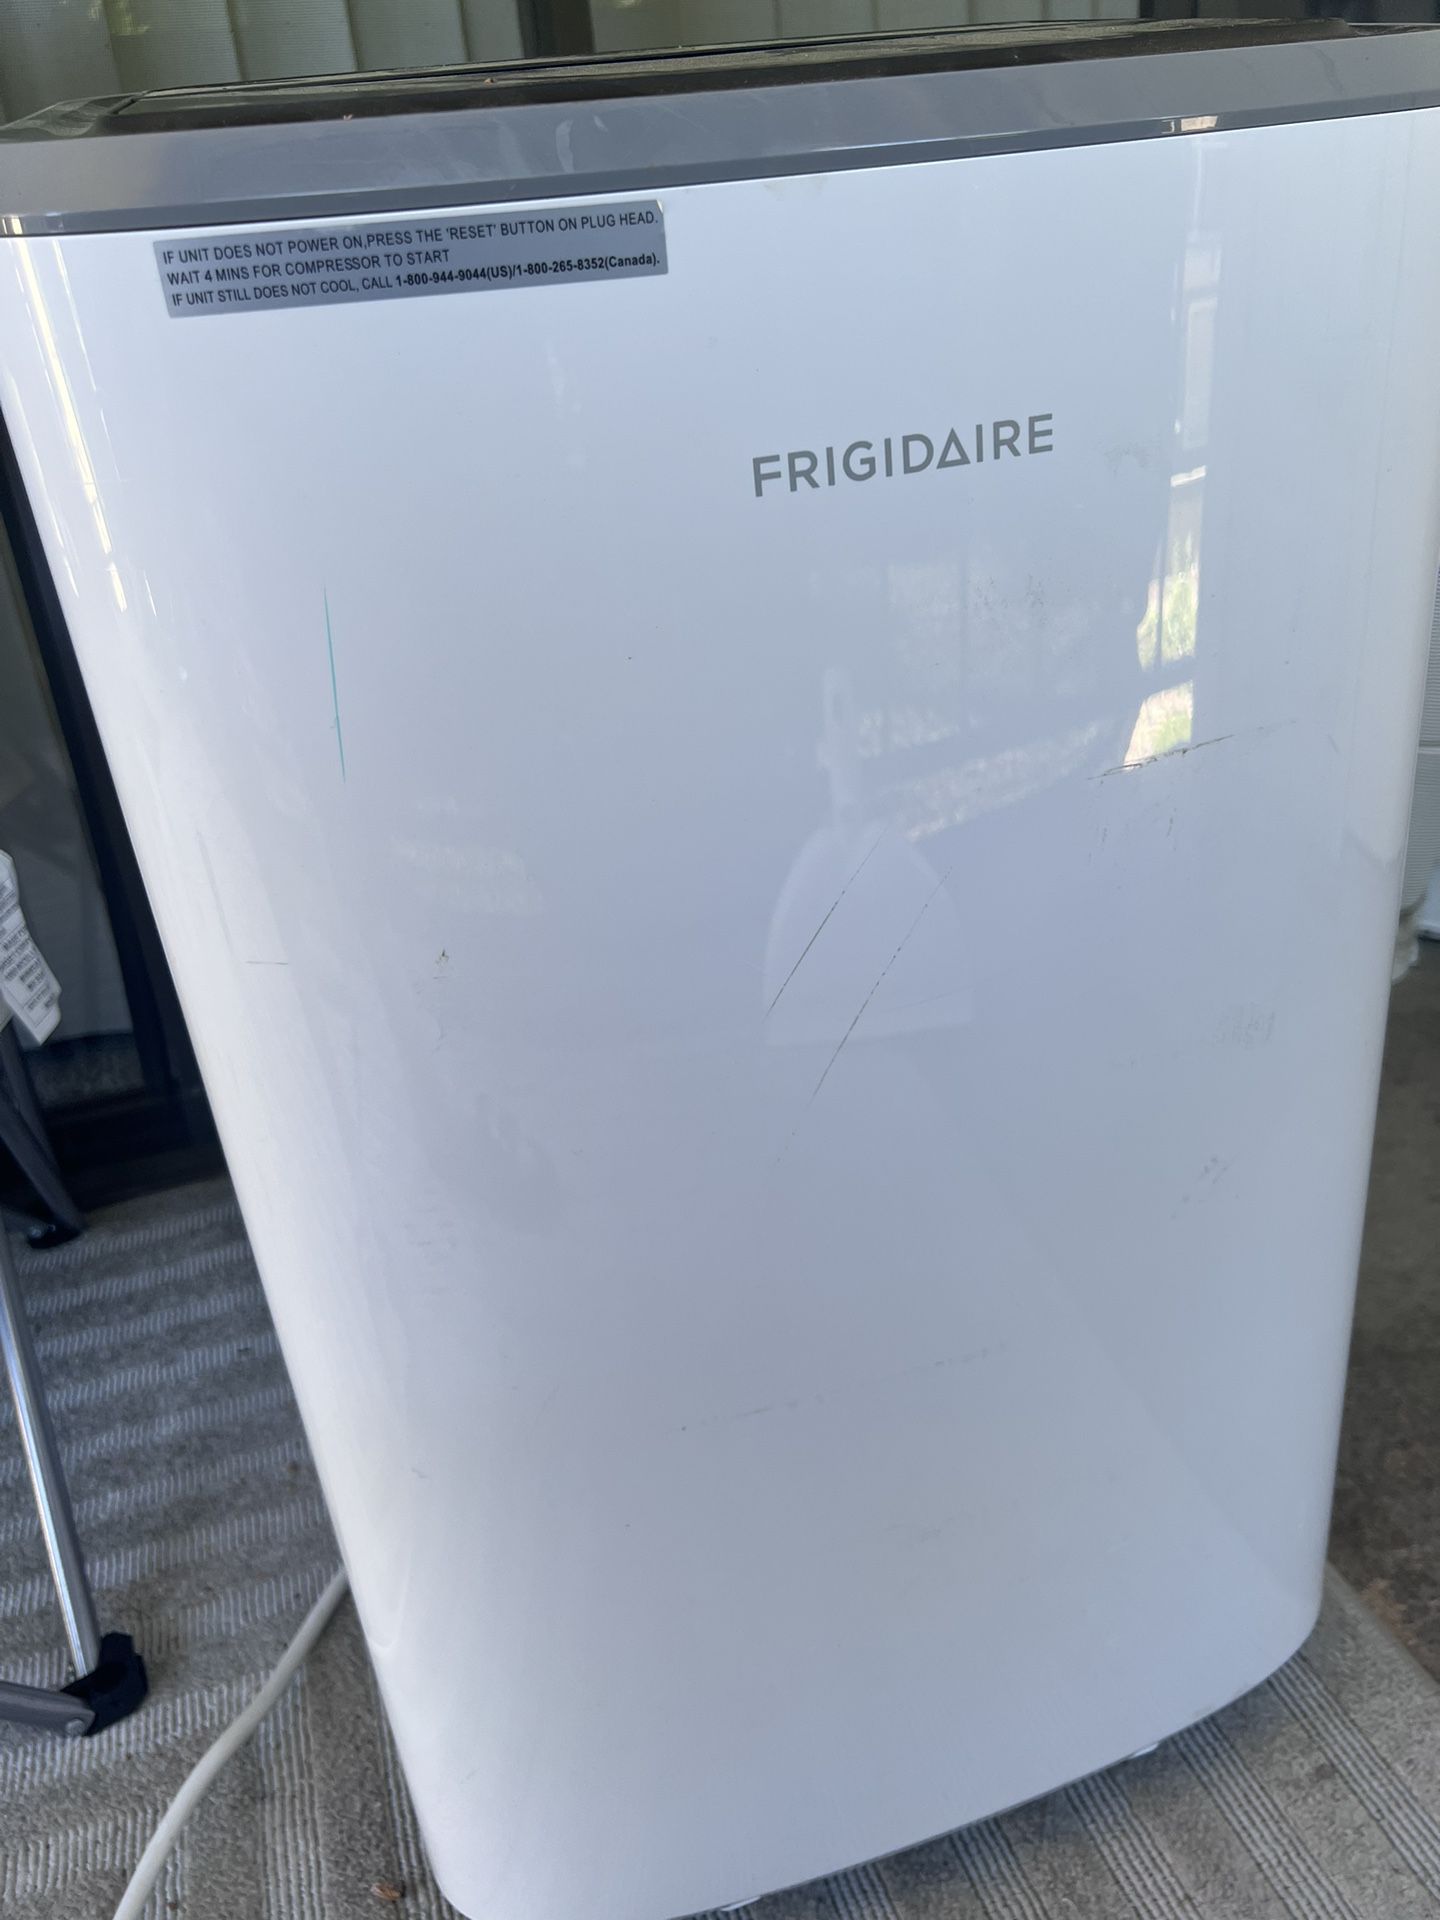 Frigidaire 3-in-1 Connected Portable Room Air Conditioner 12,000 BTU WiFi Enabled 9/10 Used